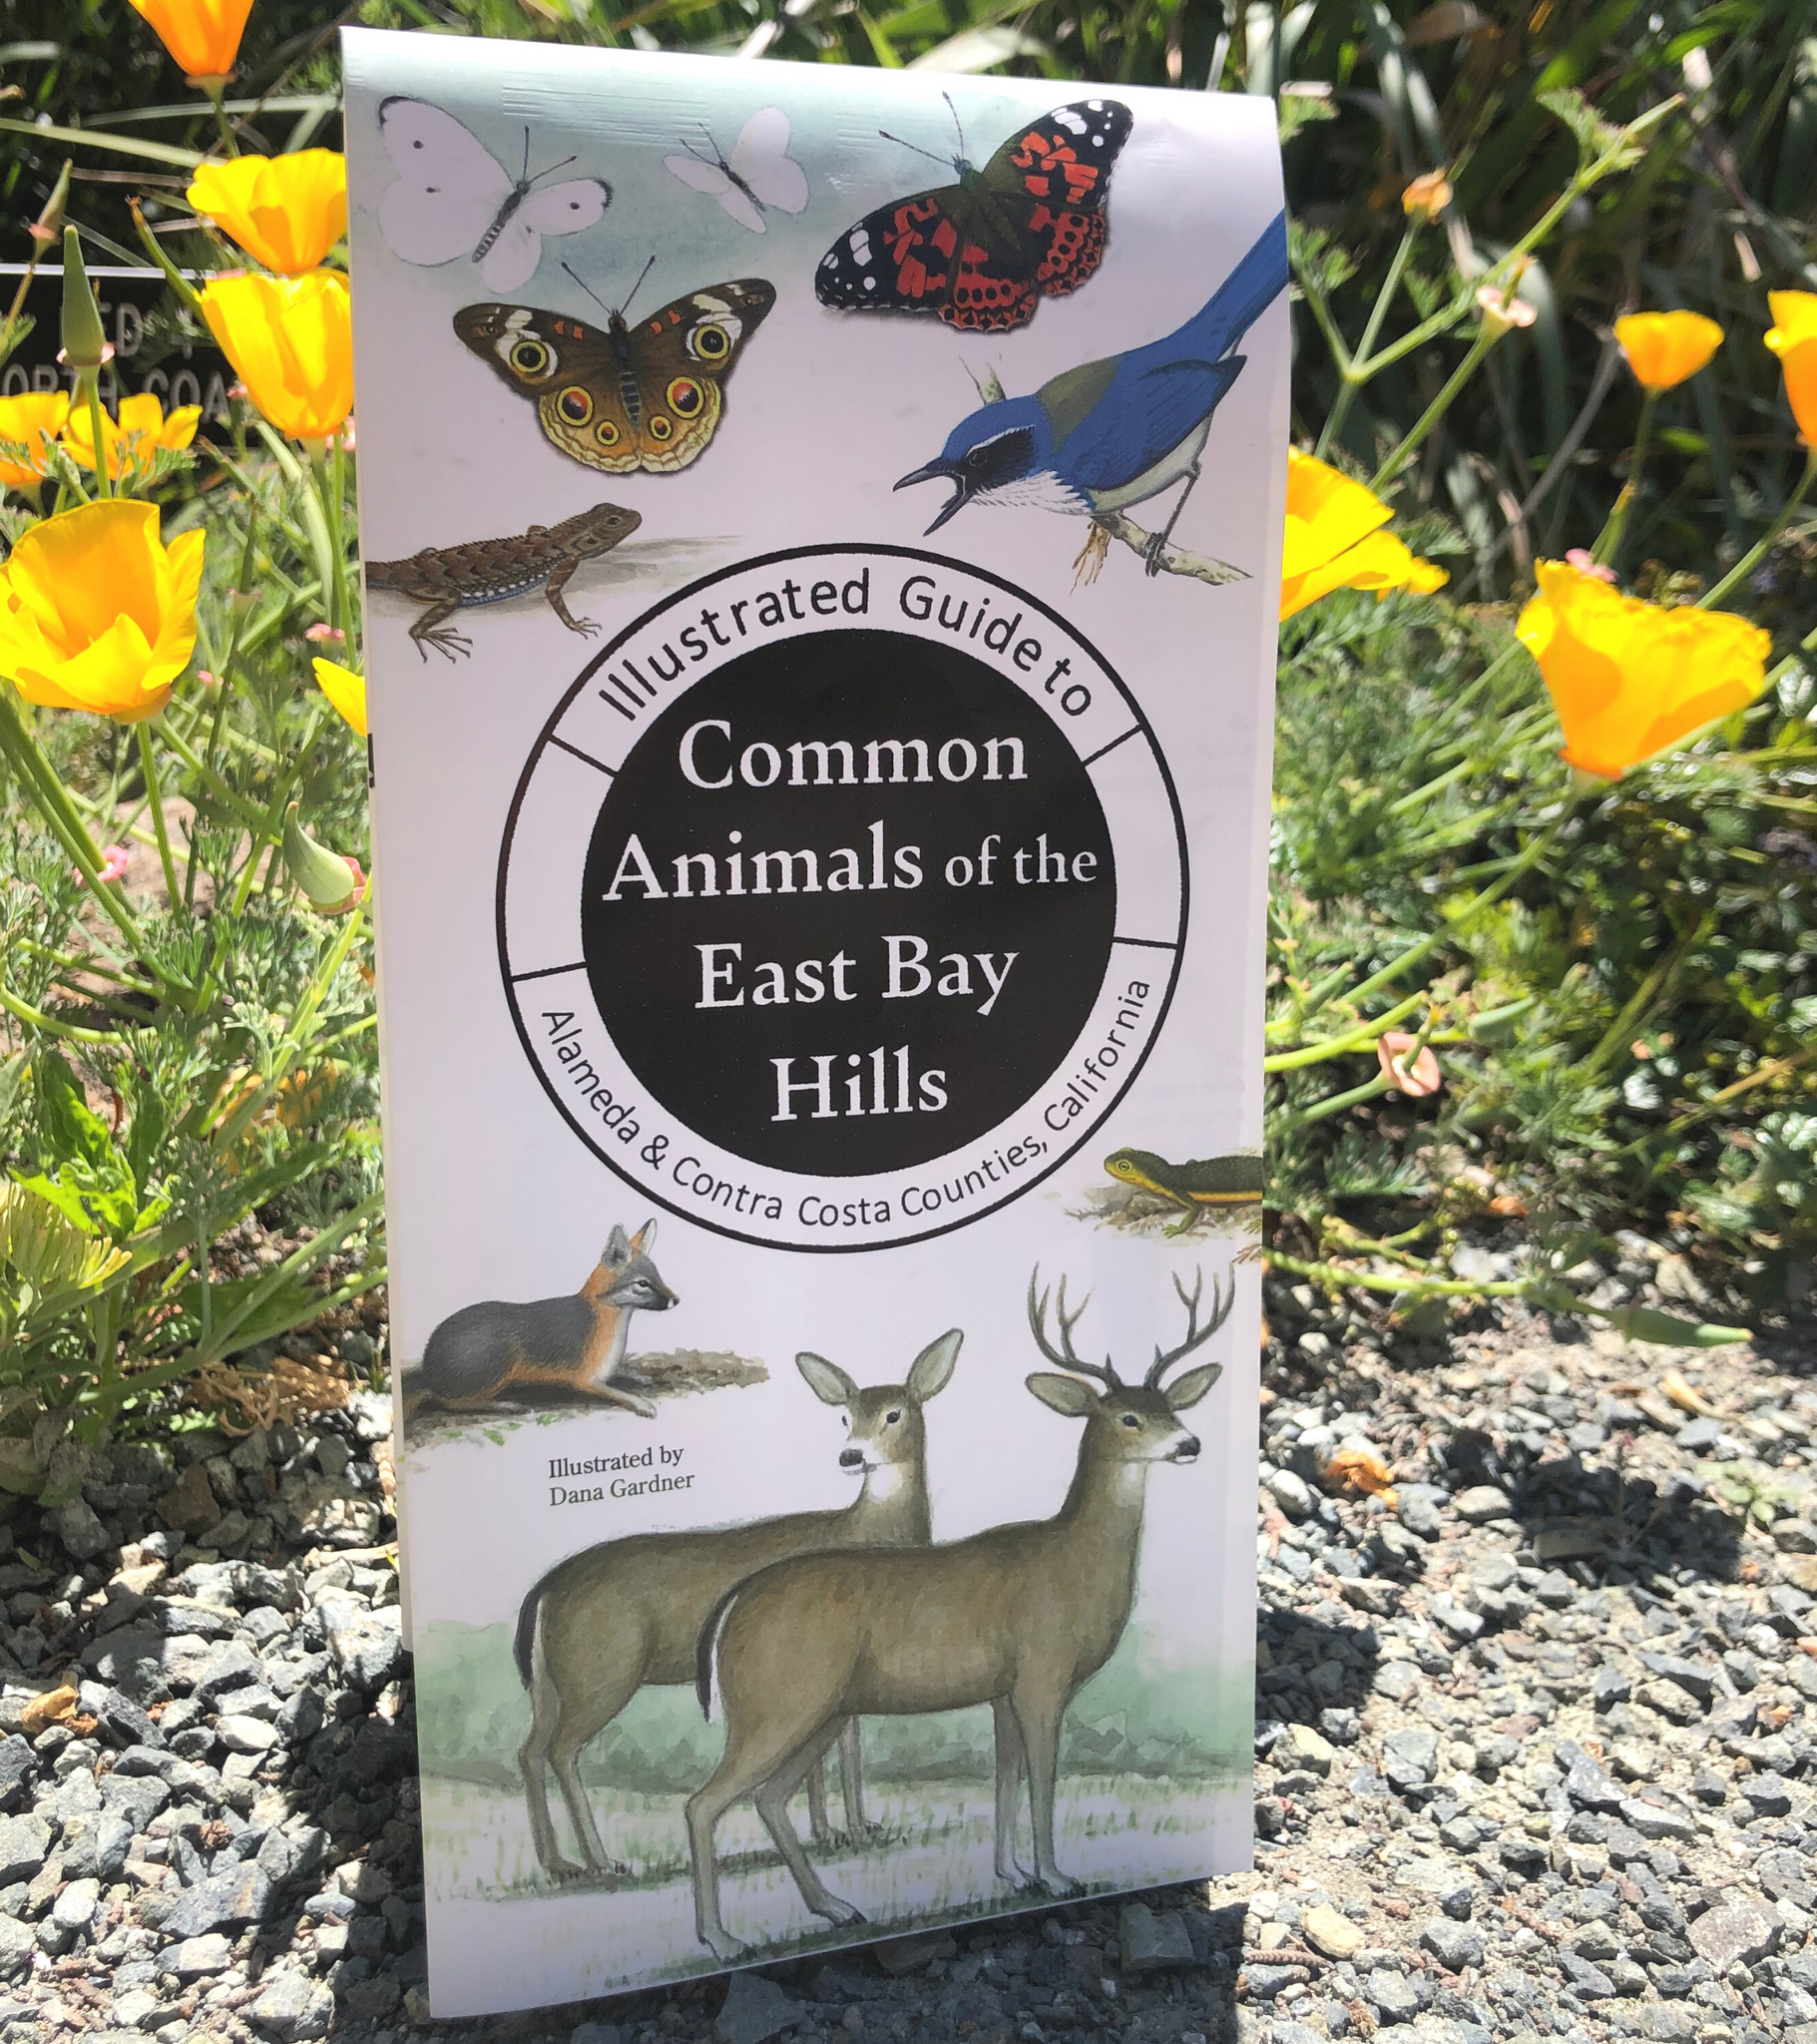 Illustrated Guide to Common Animals of the East Bay Hills - SPECIAL $5.95